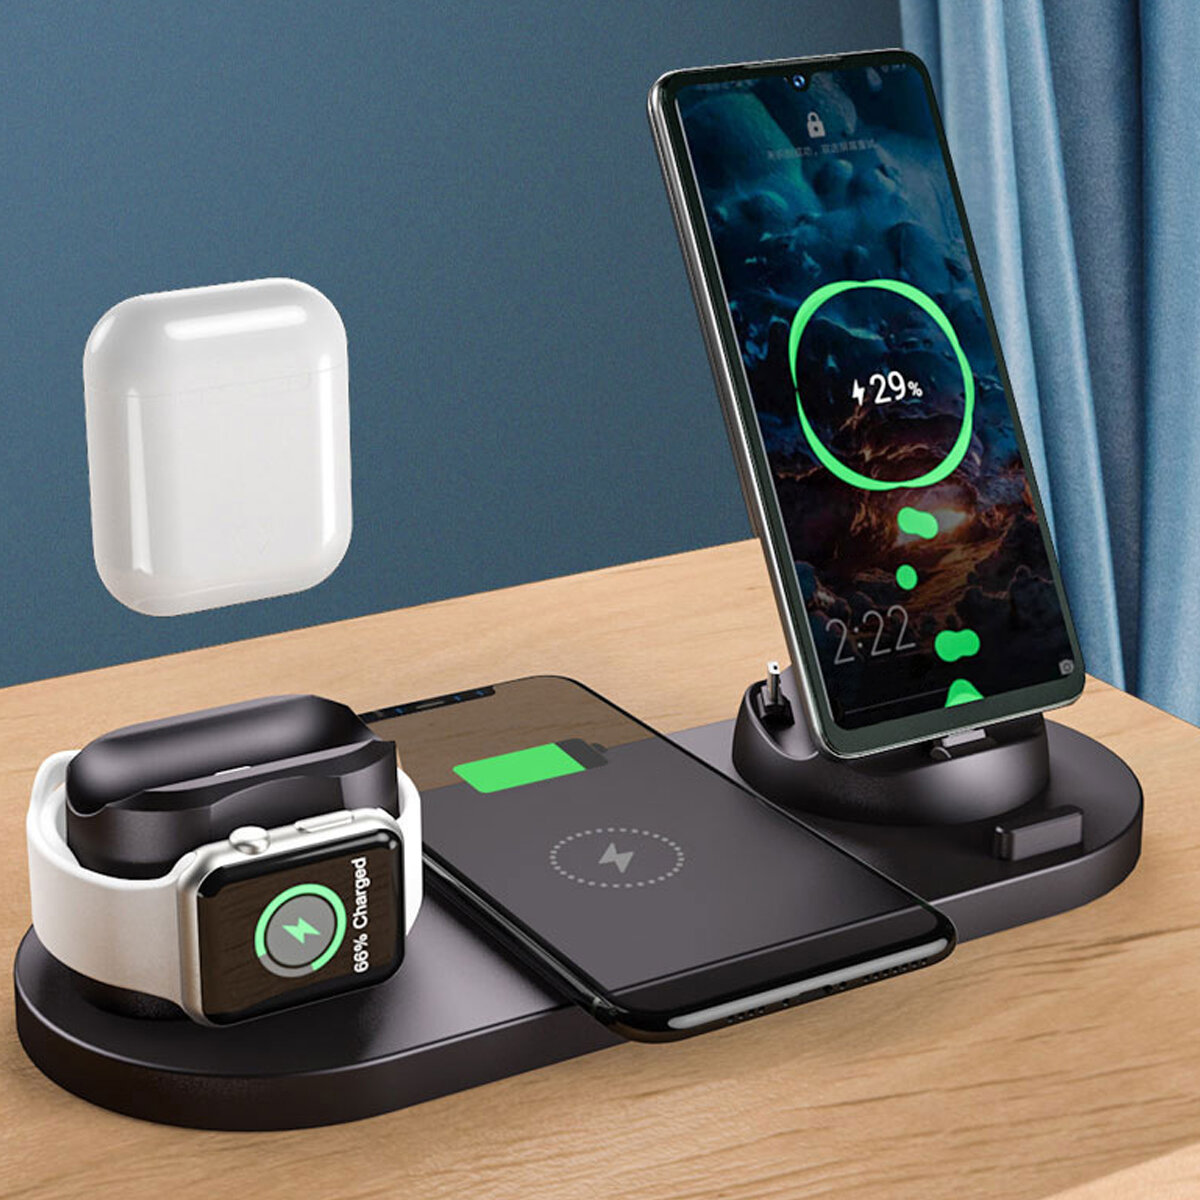 

6-IN-1 Universal 10W Qi Fast Wireless Charger Charging Pad Stand Dock Mobile Phone Holder Stand for iPhone Android/ Type